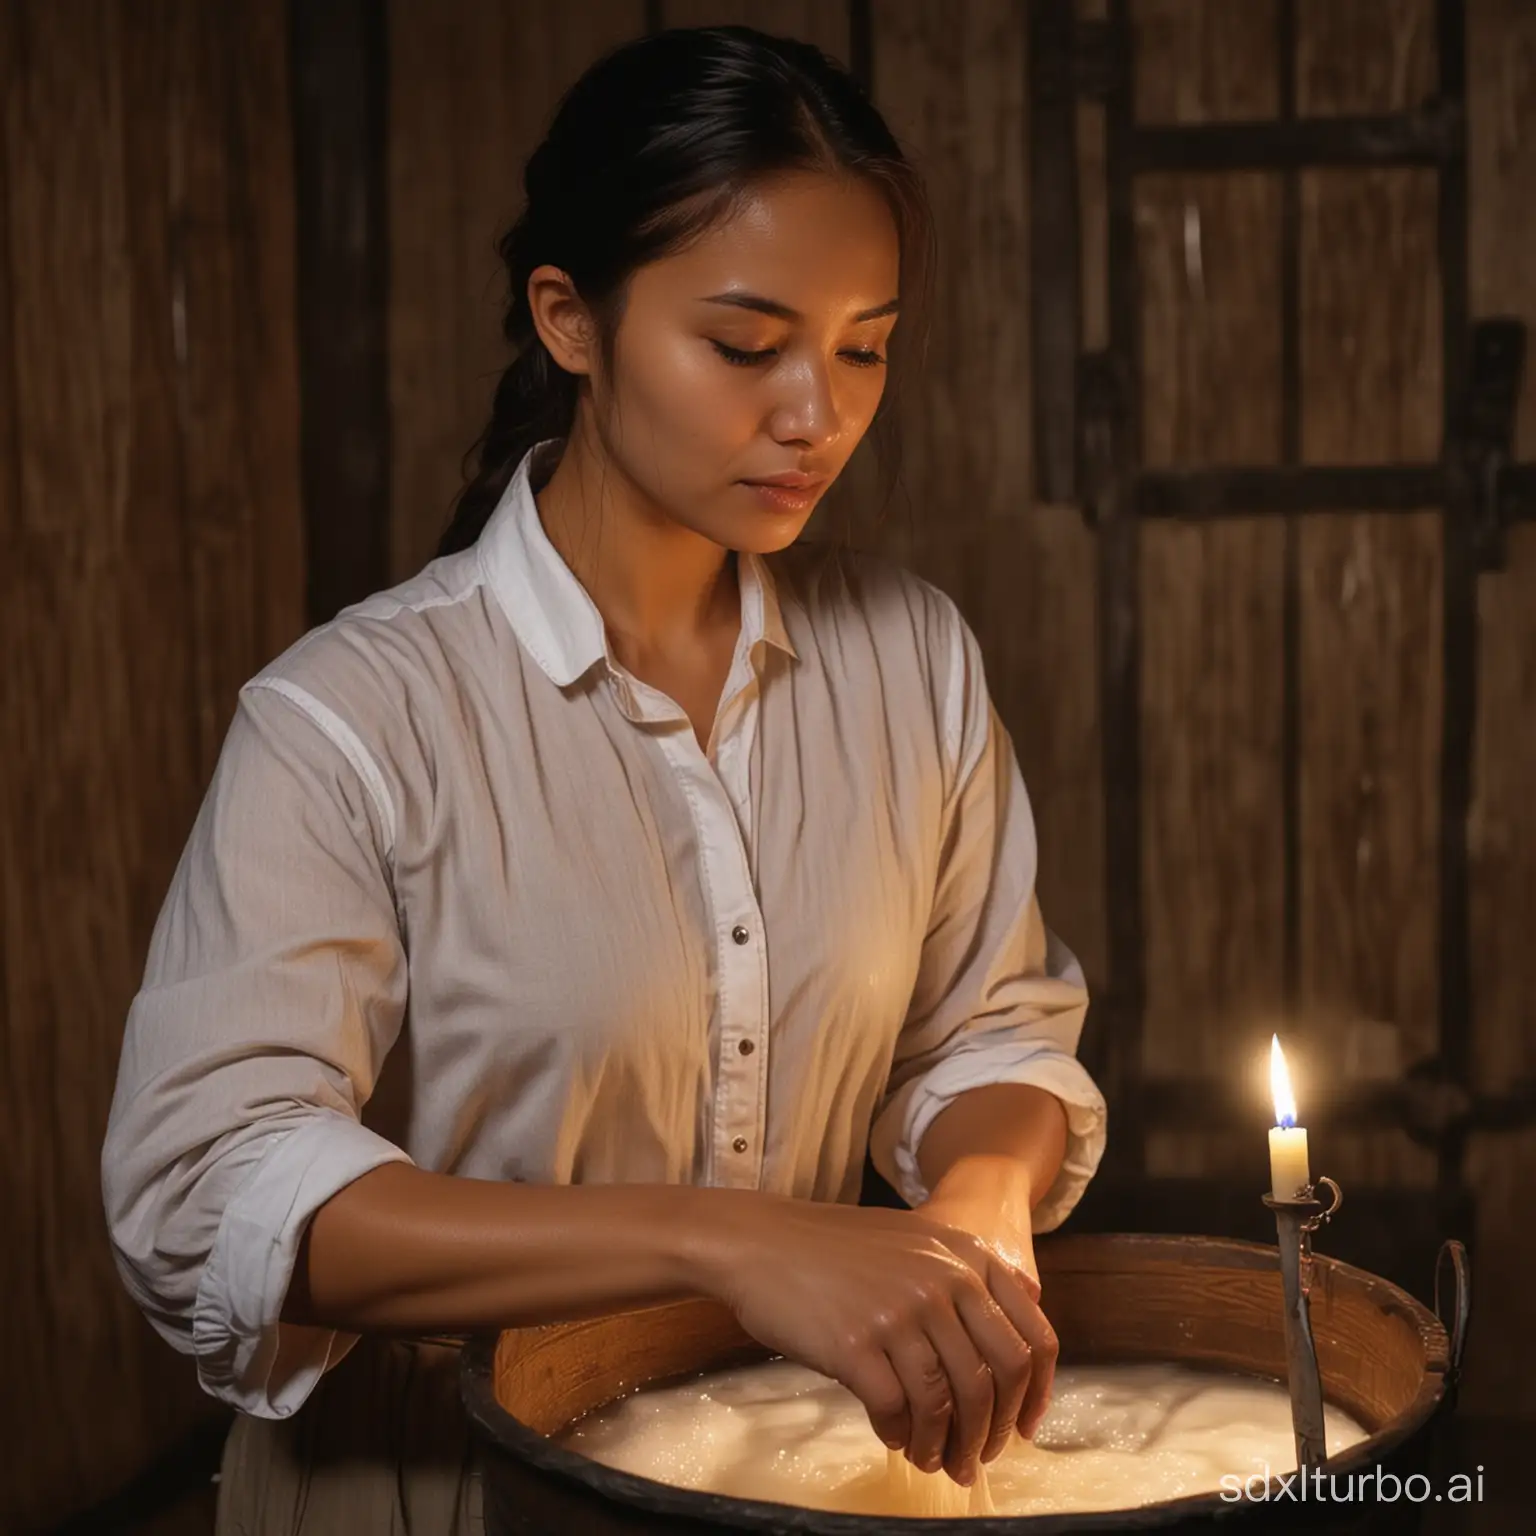 Medieval-Filipina-Woman-Washing-Hands-in-Farmhouse-Candlelight-Portrait